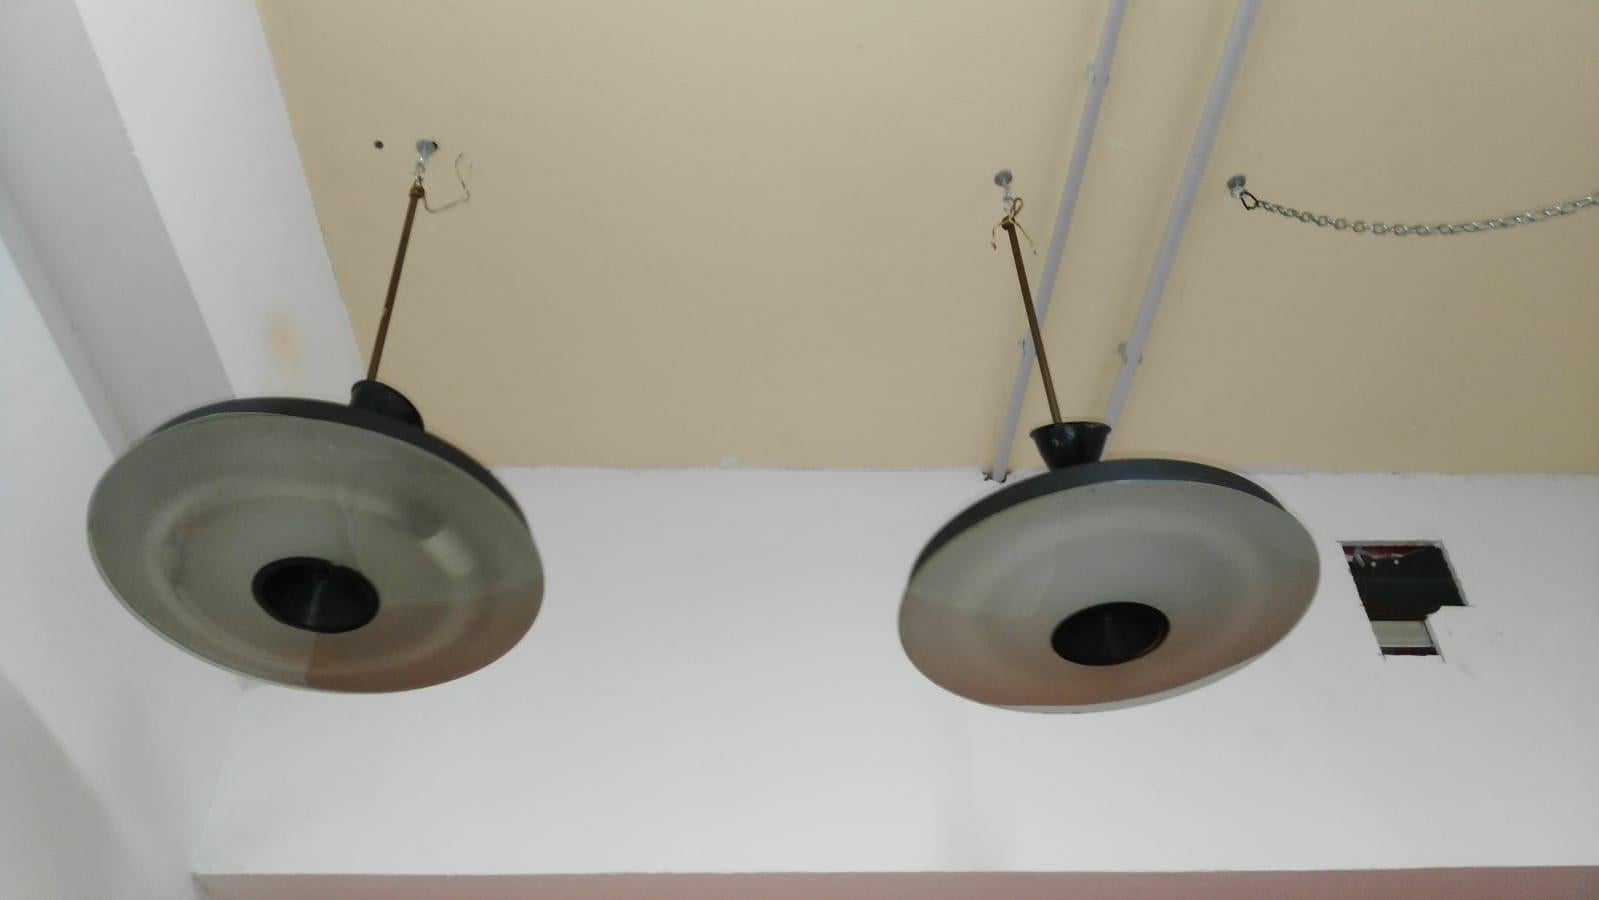 Pair of Industrial-style pendant lights in black metal. The Industrial-style chandelier par excellence: perfect for lighting kitchens, living rooms, lofts, open spaces, bars, restaurants, etc.